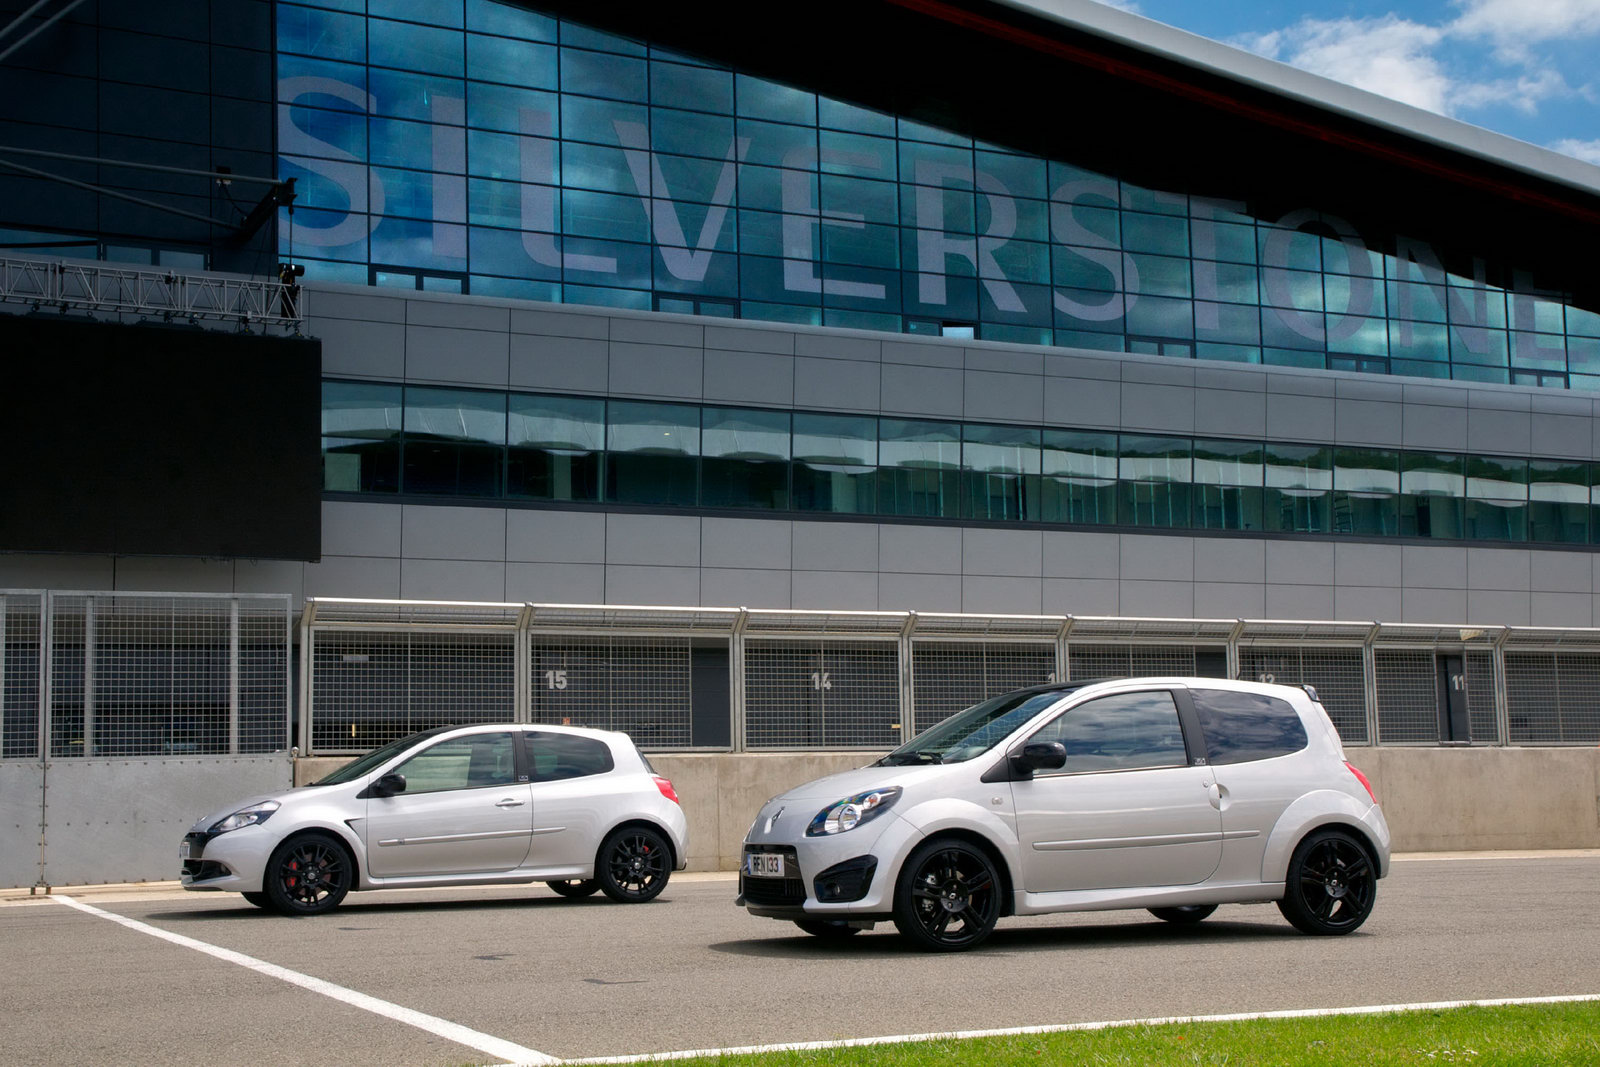 Renault Twingo RS 133 and Clio RS 200 Silverstone GP